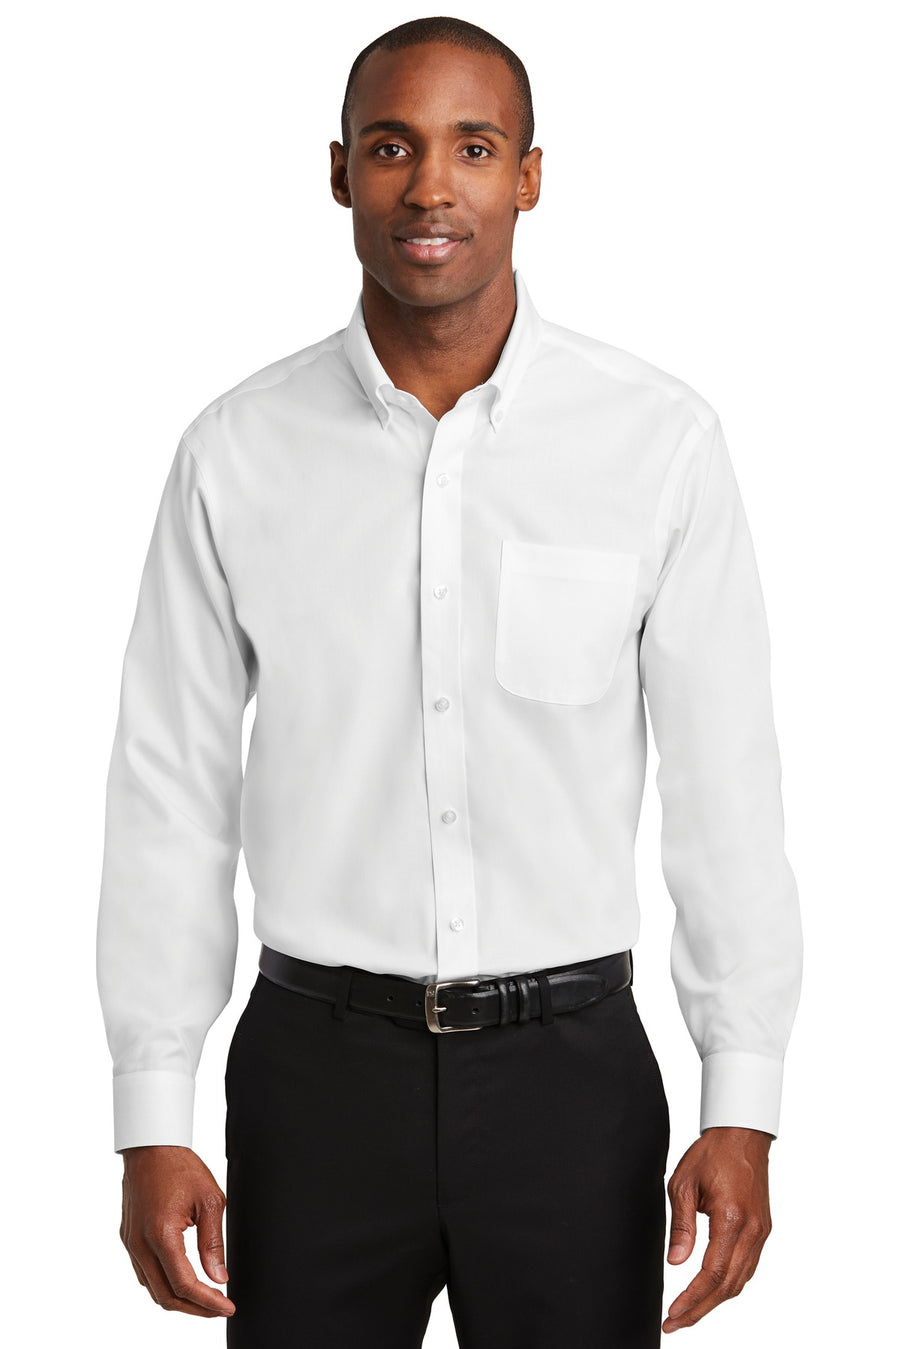 Red House Pinpoint Oxford Non-Iron Shirt.